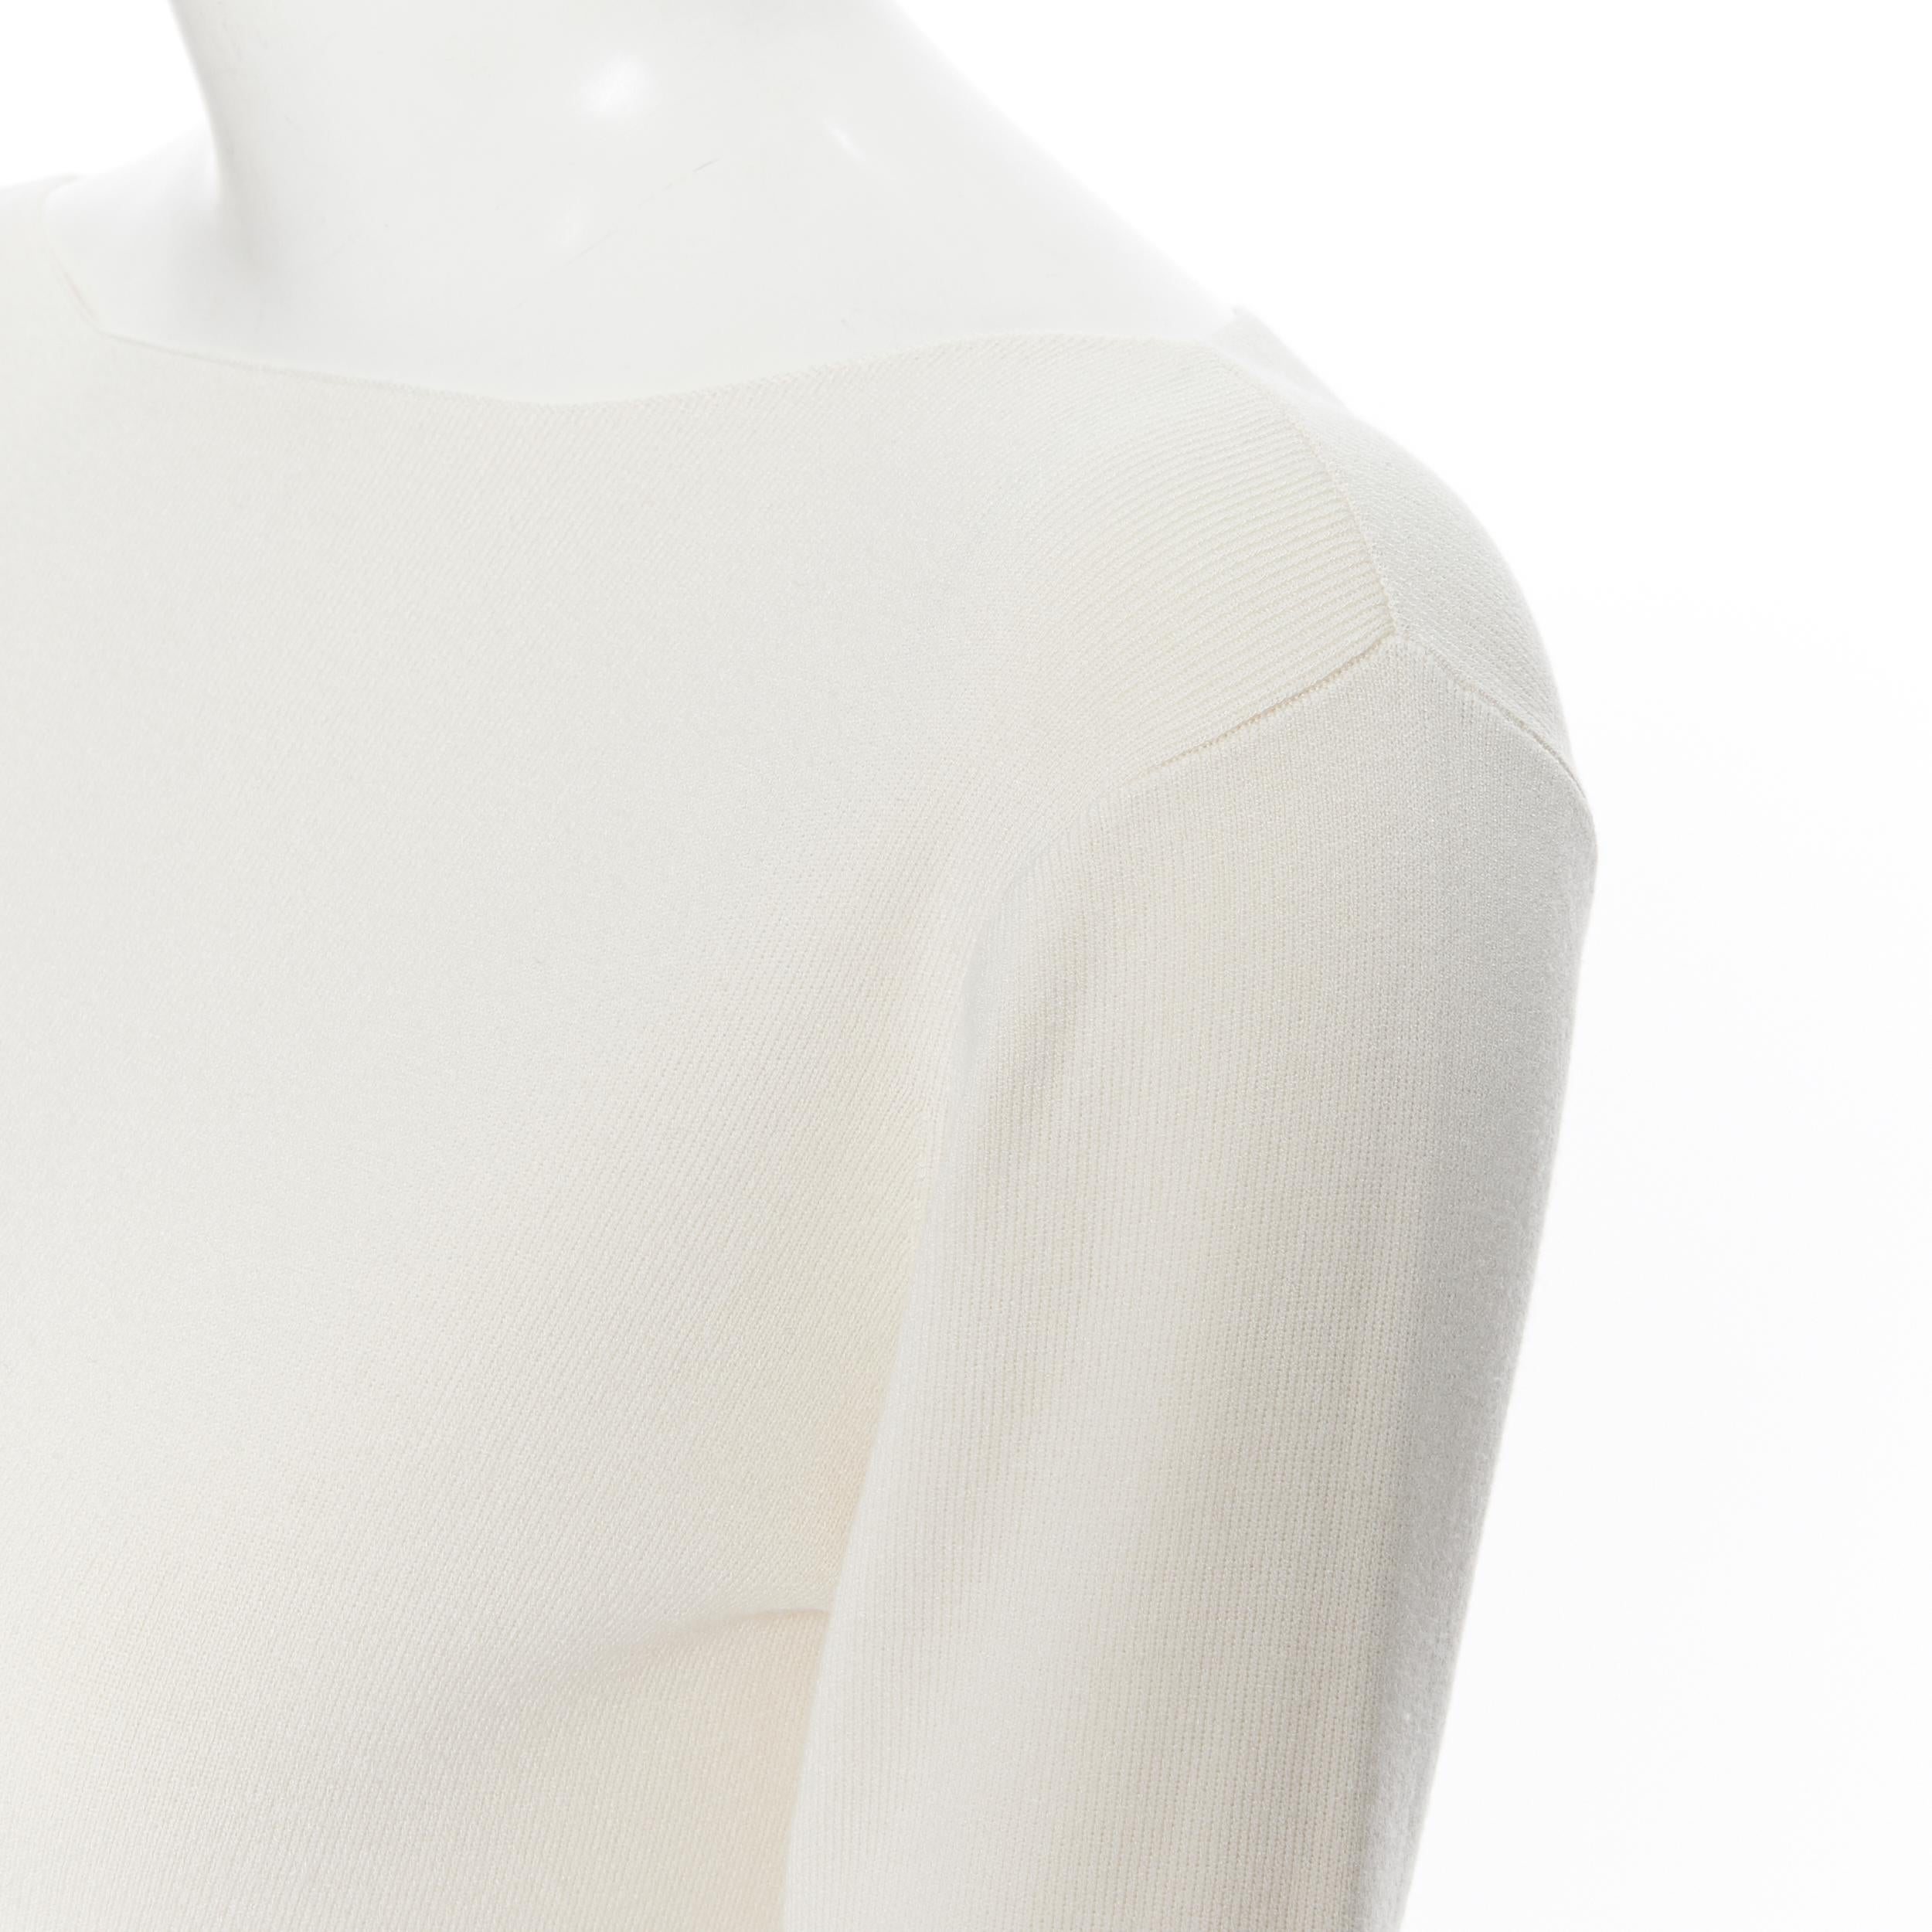 WEEKEND MAX MARA cream beige viscose polyamide knit boat neck sweater top XS
Brand: Weekend Max Mara
Model Name / Style: Knitted top
Material: Viscose blend
Color: Beige
Pattern: Solid
Extra Detail: Bateau neckline. Long sleeve. Long sleeve. Boat